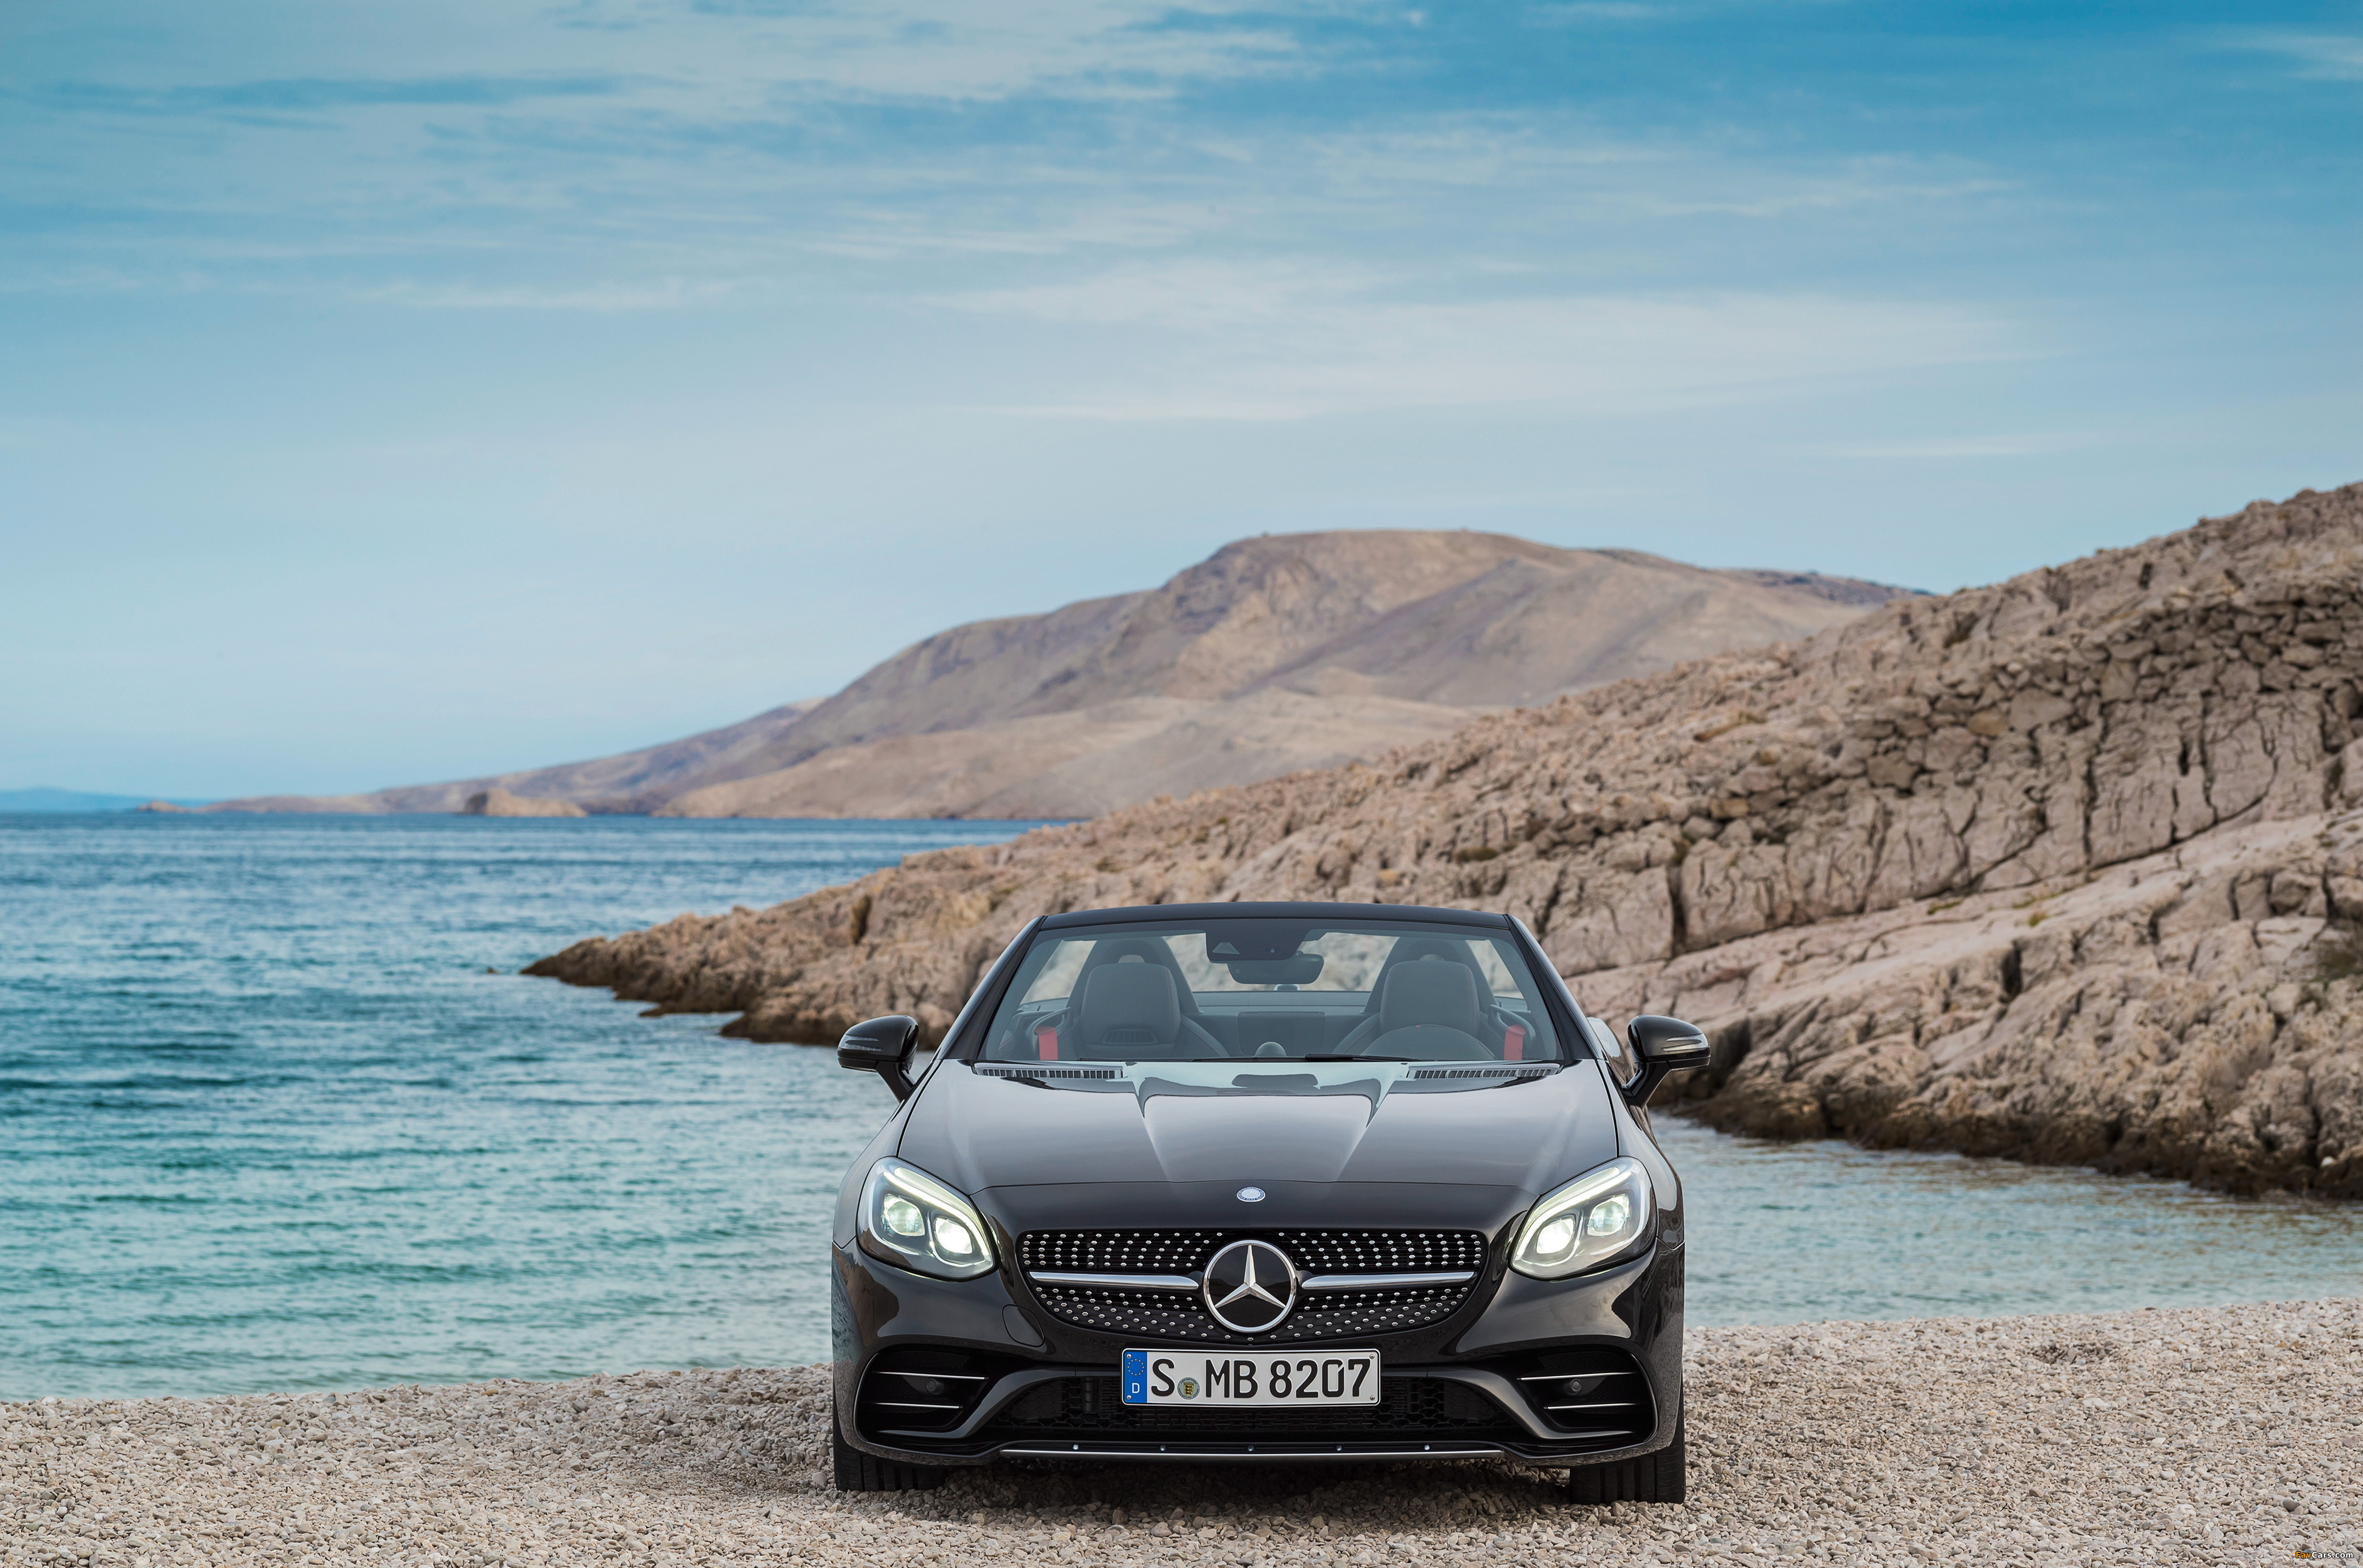 Mercedes-AMG SLC 43 (R172) 2016 wallpapers (4096 x 2718)